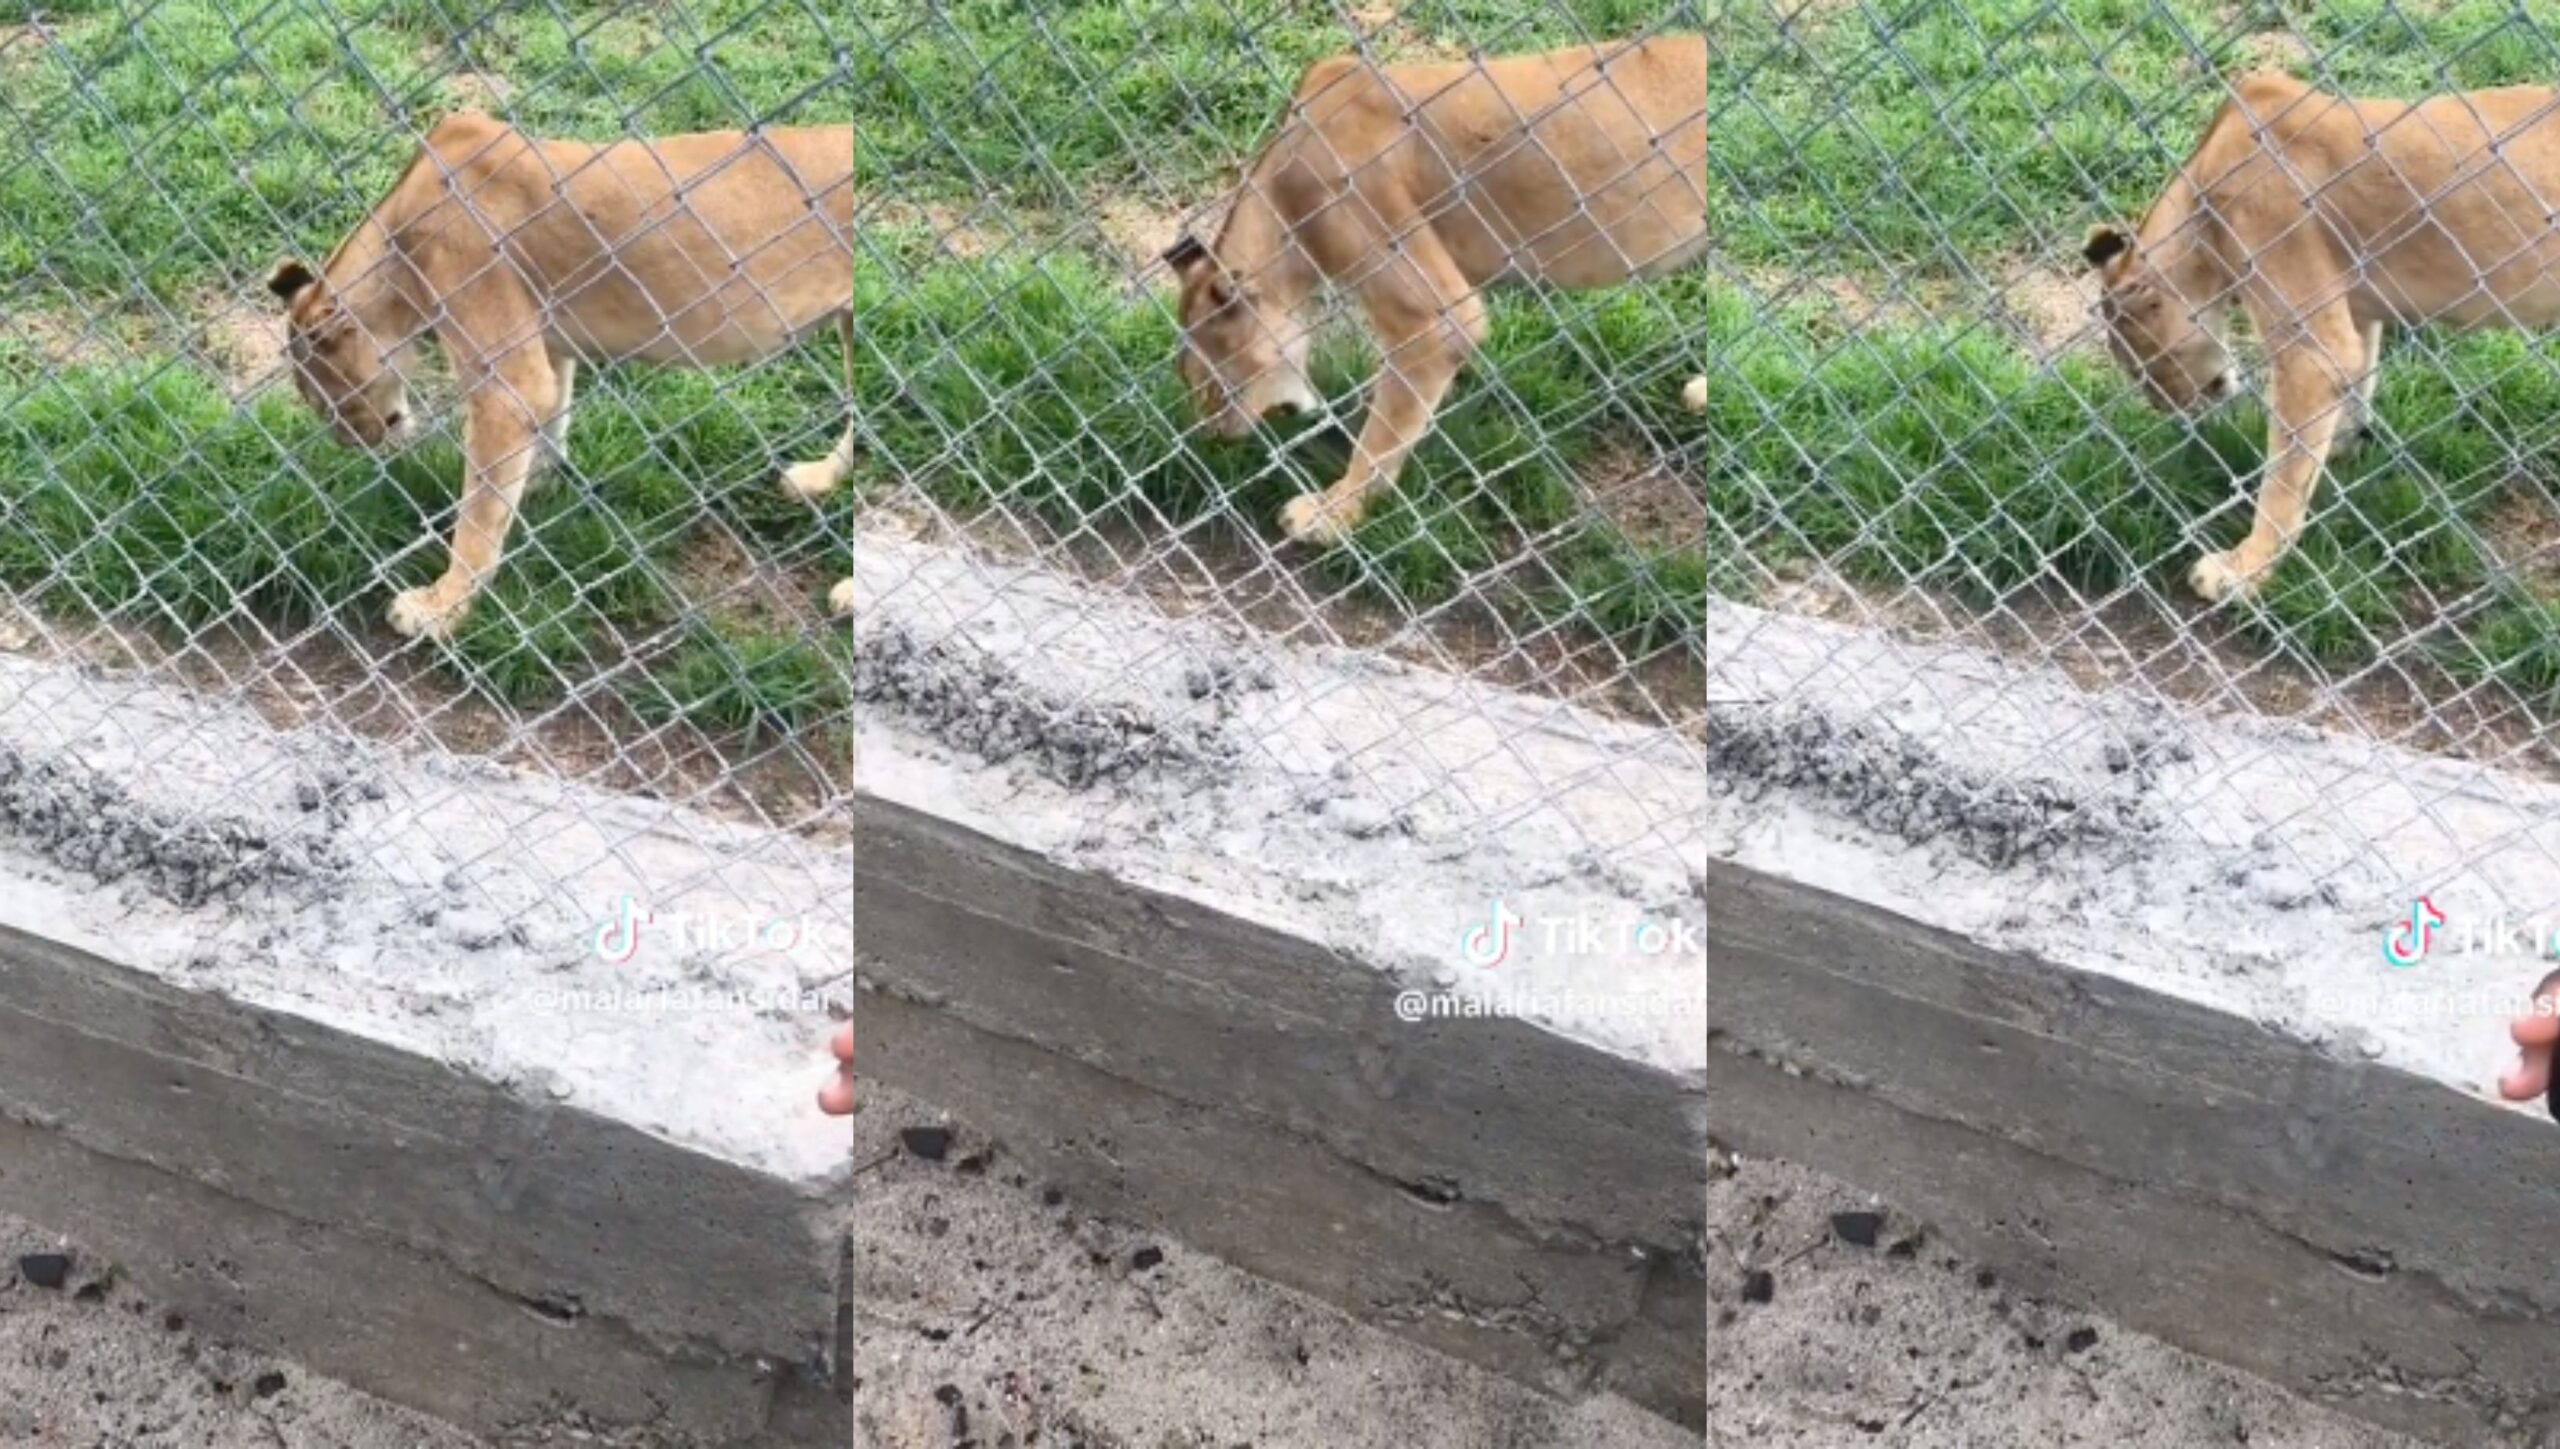 Sapa Nice one- Lion spotted eating grass in a Nigerian zoo (Video)